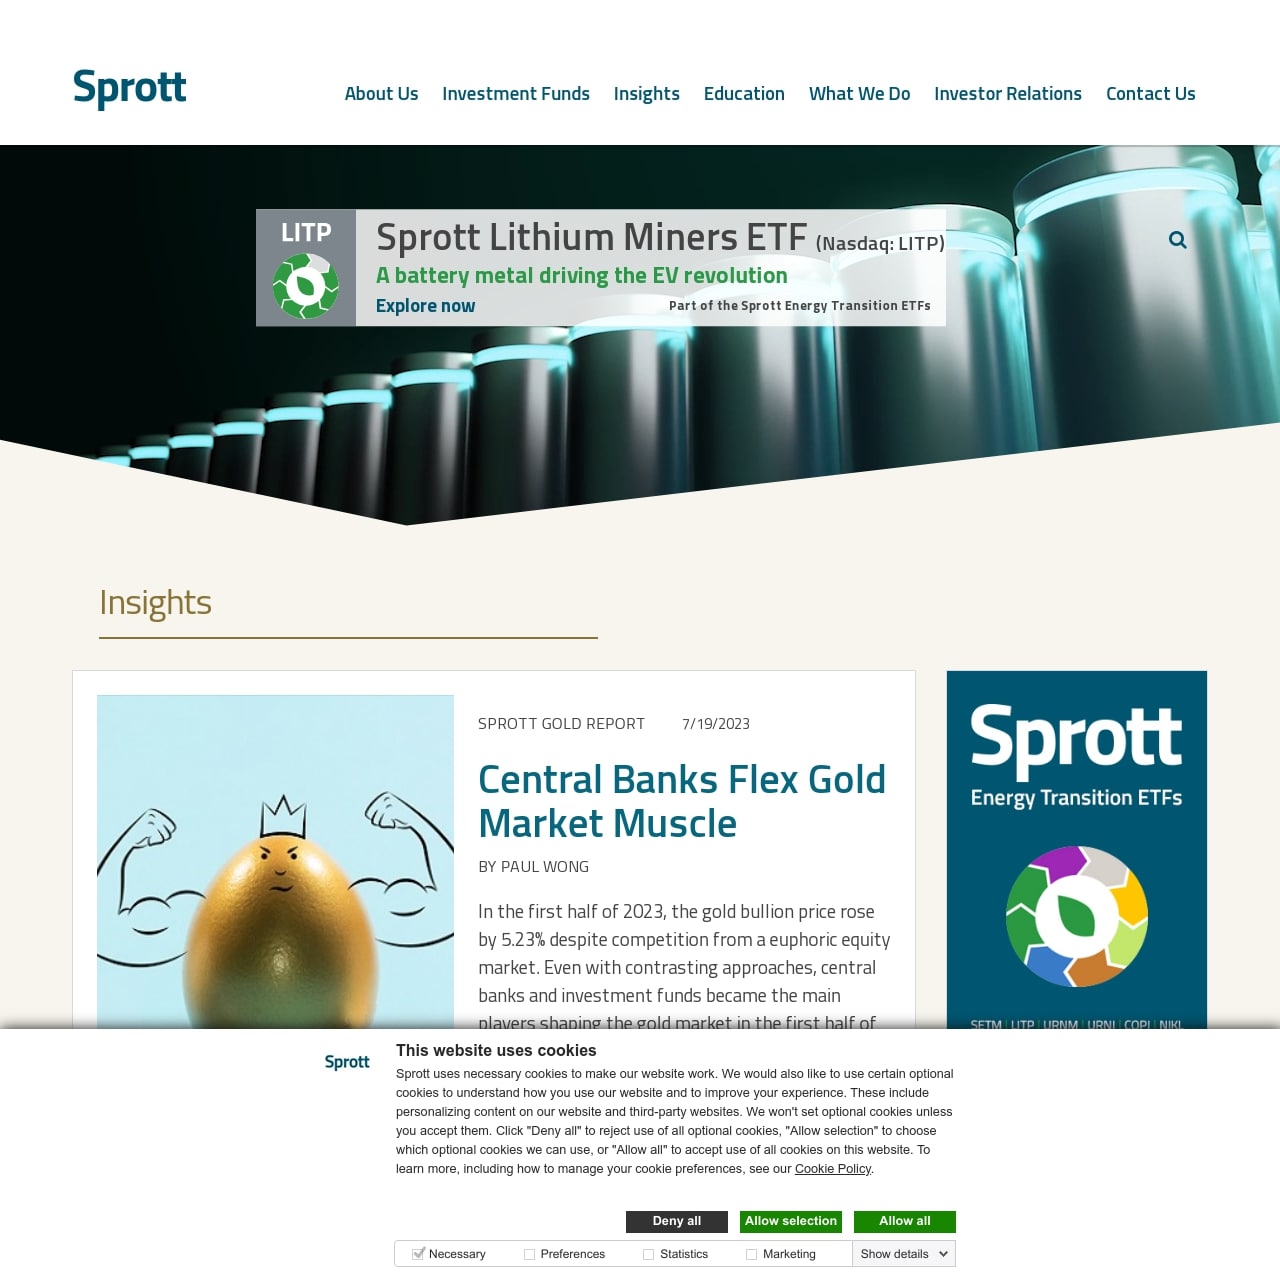 Sprott Pyhysical Gold IRA Review website